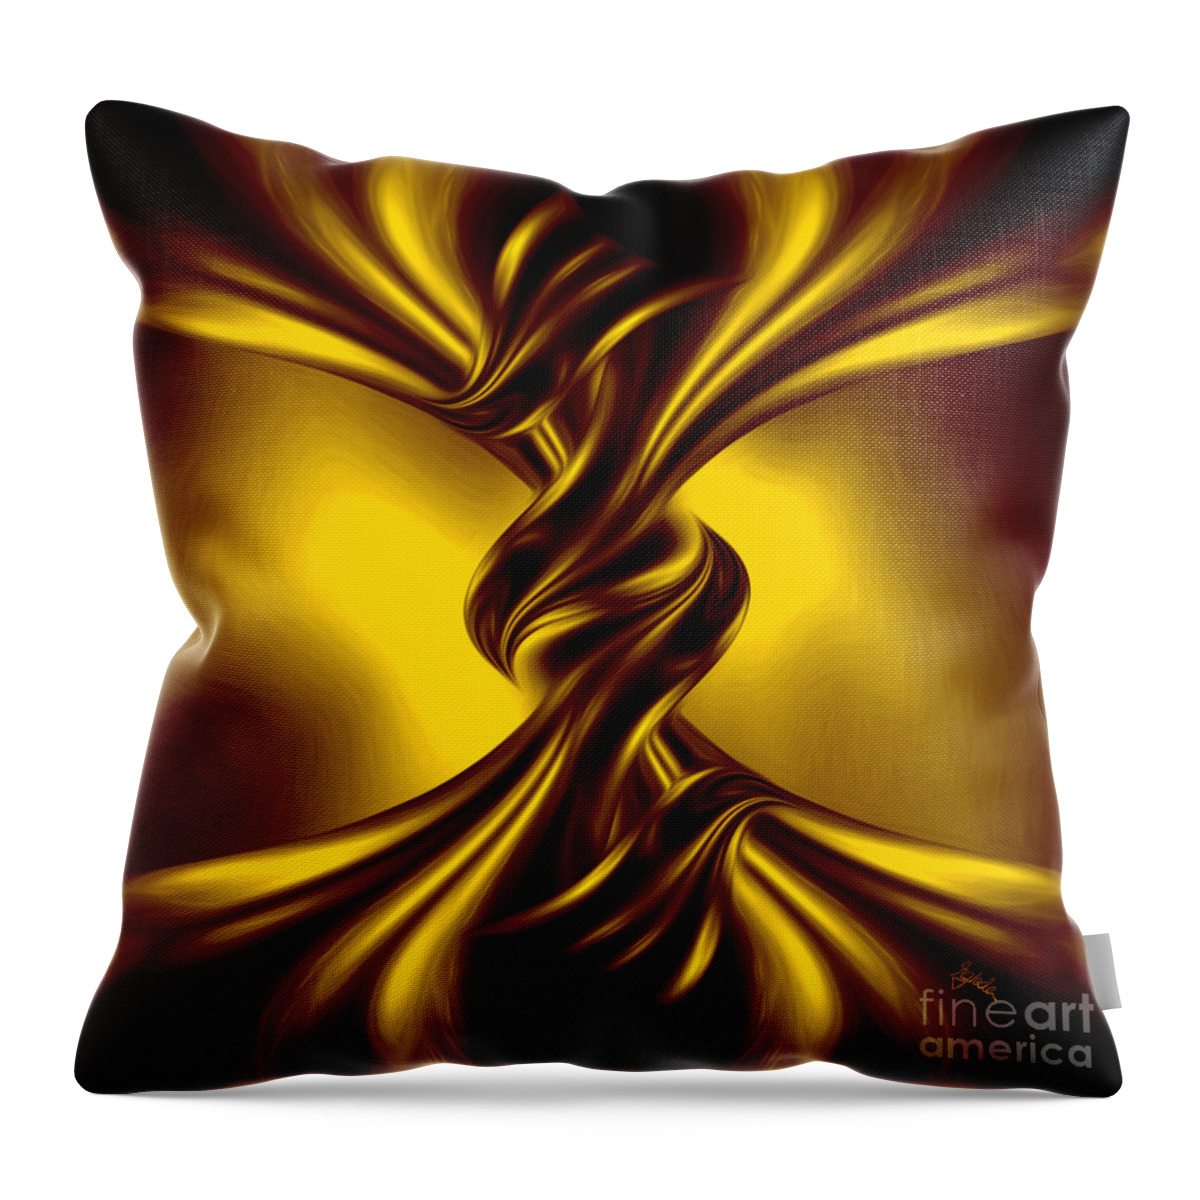 Rgiada Throw Pillow featuring the digital art Abstract art - The Knot by RGiada by Giada Rossi